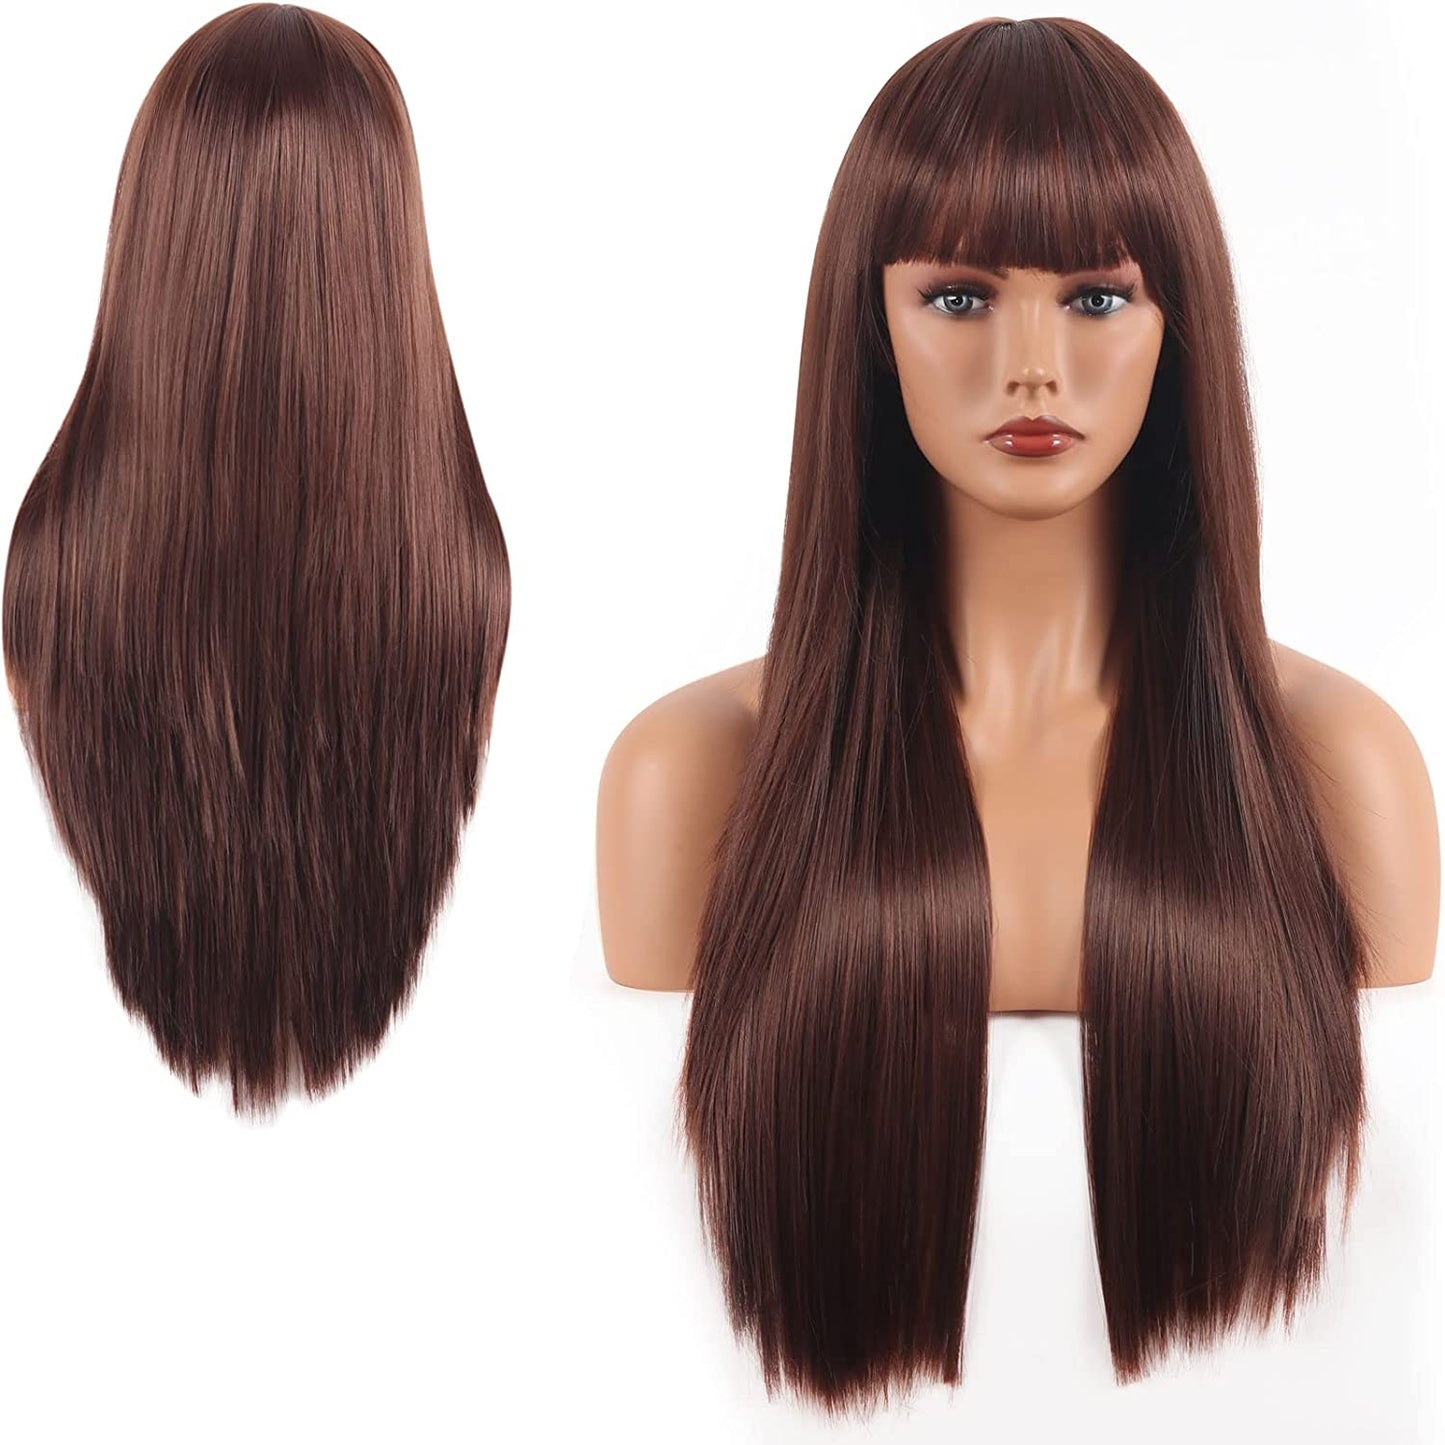  Long Straight Brown Wig with Bangs, Dark Brown Wig for Women